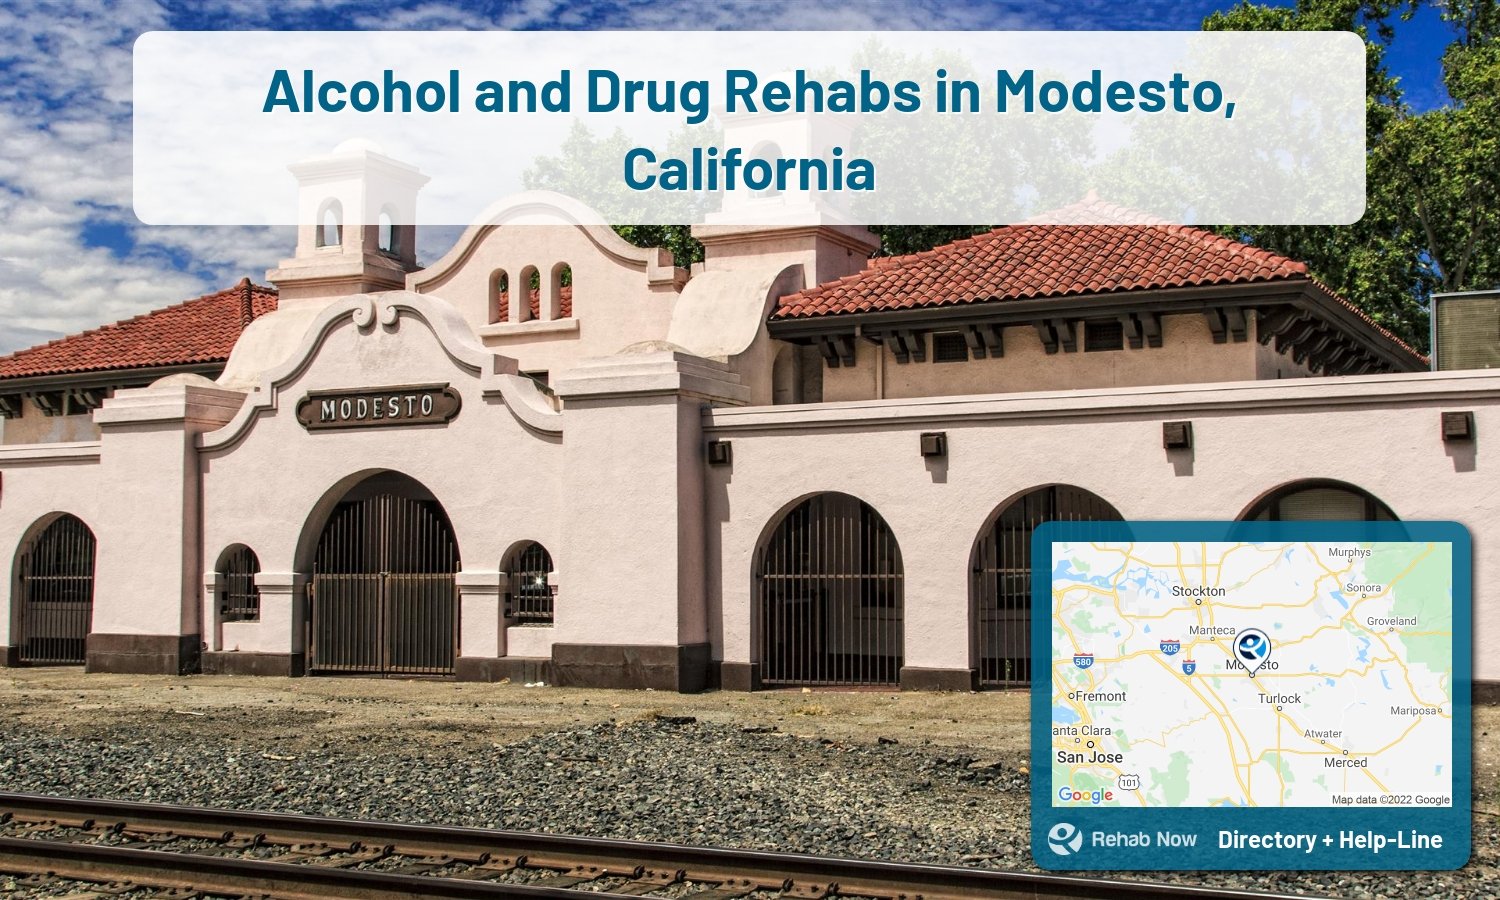 Modesto, CA Treatment Centers. Find drug rehab in Modesto, California, or detox and treatment programs. Get the right help now!